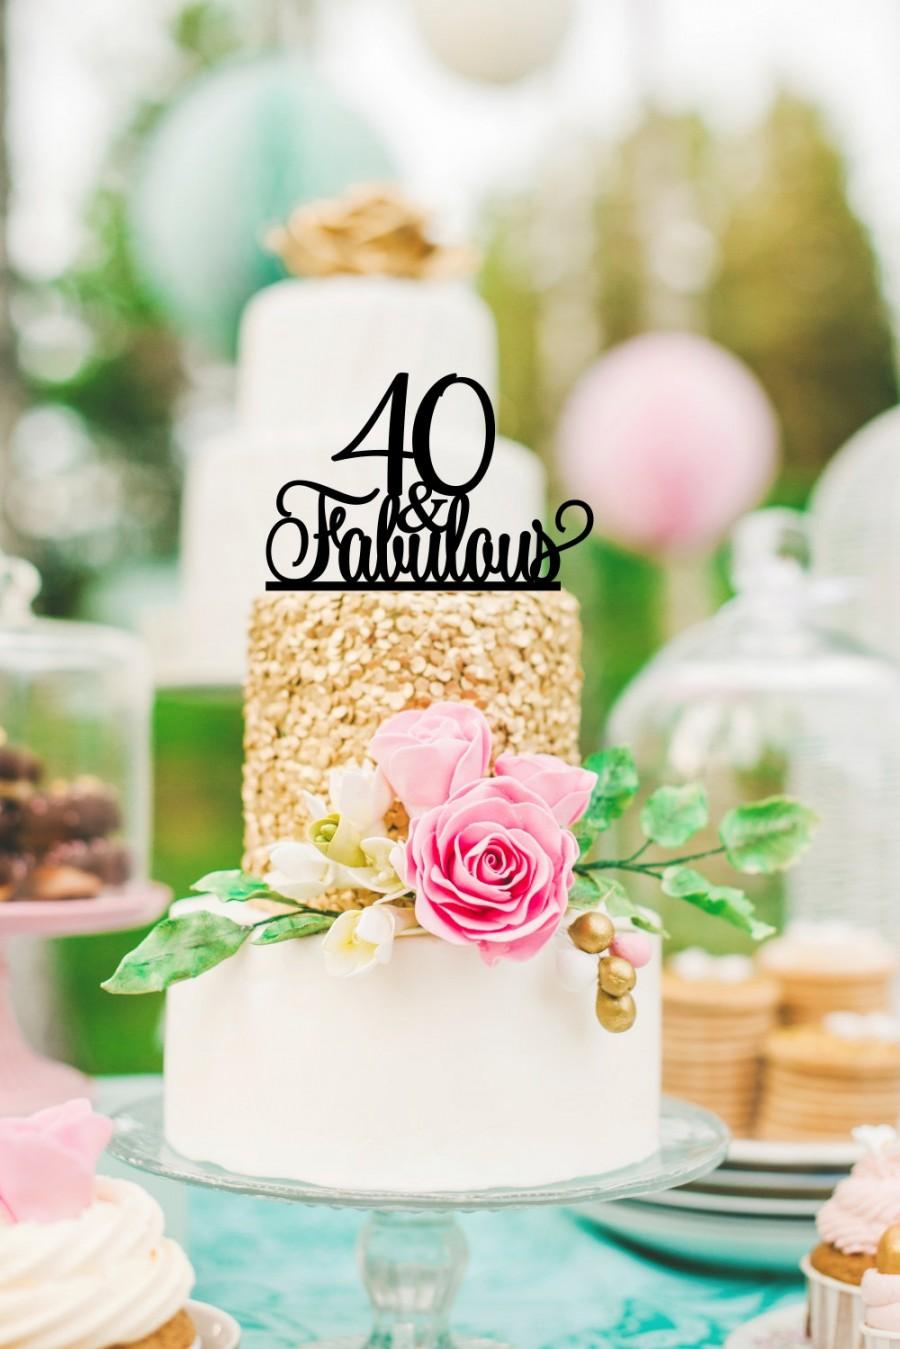 Wedding - 40th Birthday Cake Topper - 40 and Fabulous Cake Topper - Happy 40th